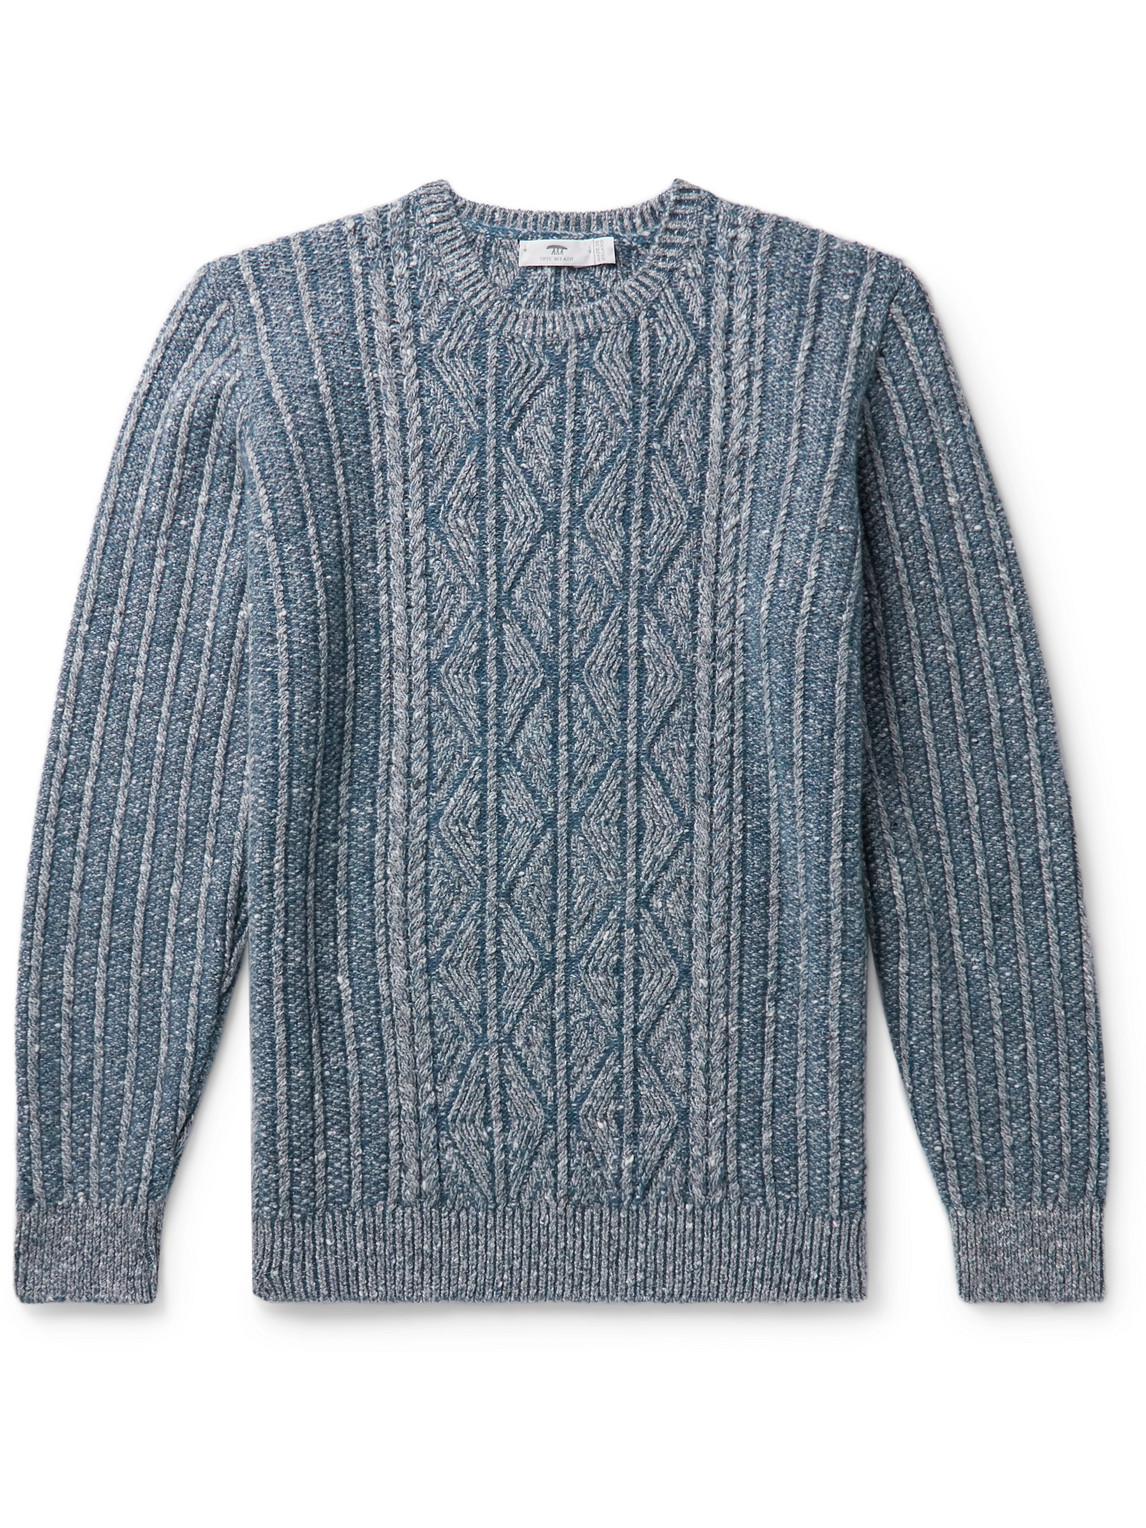 Inis Meain Aran-knit Merino Wool And Cashmere-blend Sweater In Blue